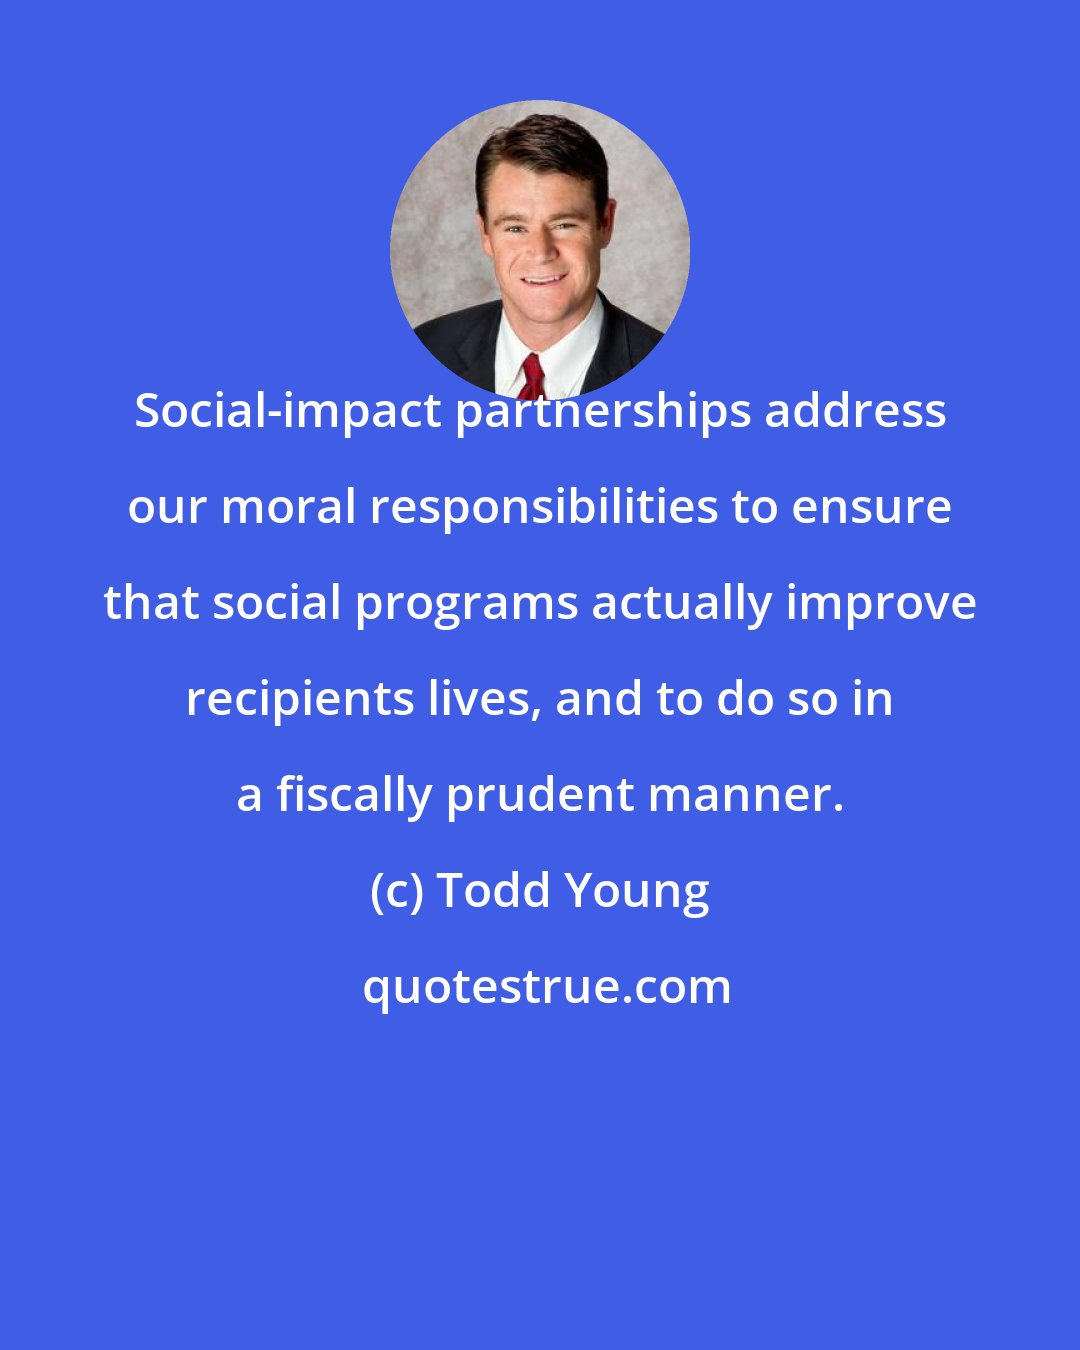 Todd Young: Social-impact partnerships address our moral responsibilities to ensure that social programs actually improve recipients lives, and to do so in a fiscally prudent manner.